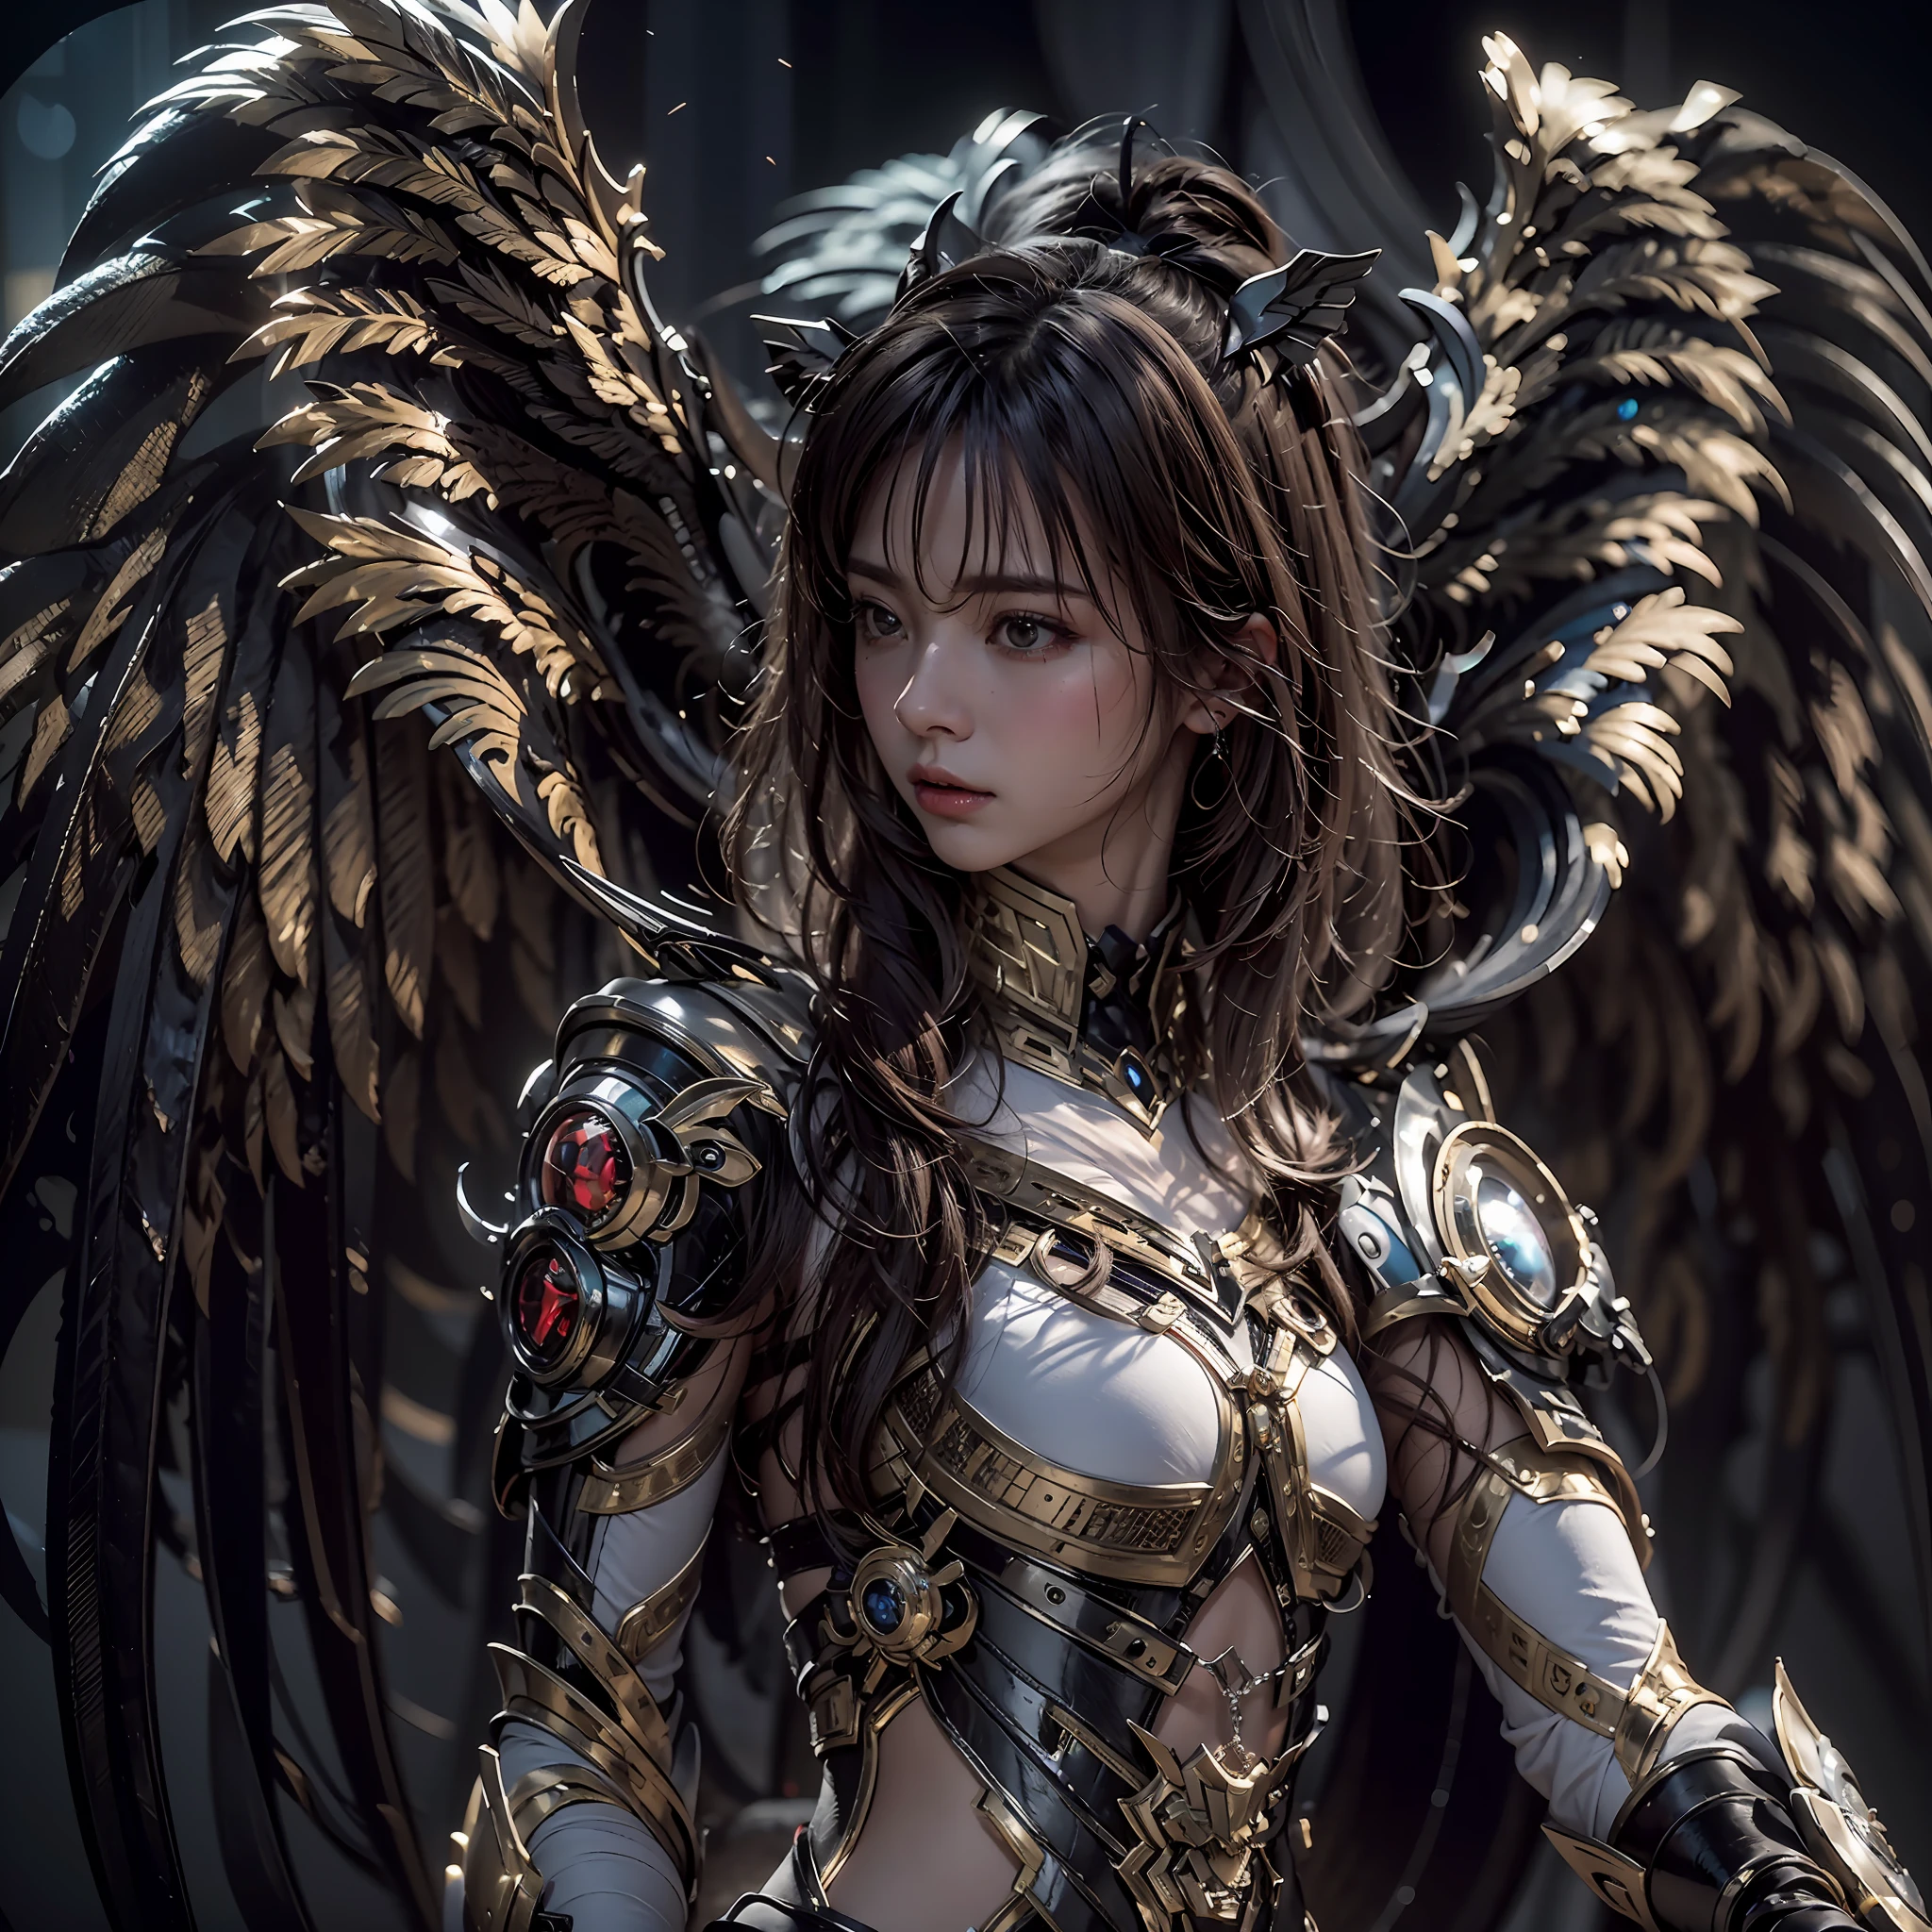 1girll，Dark Angel Warrior，(((On the back there is a pair of large black half-body wings)))，Black titanium，metal wingetal wings）），（（Black gold metal armor）），high detal，（beautifulface），Perfect facial features，red tinted hair，Black and gold greatsword，Futuristic technical background，apathy、Aloof、On the high horse，atmospurate、macro，Realistis，hdr（HighDynamicRange）、Ray traching、NVIDIA RTX、Hyper-Resolution、illusory 5、sub surface scattering、post-proces、Anisotropy Filtering、depth of fieldaximum definition and sharpness，Surface Coloring、Accurately simulate light-material interactions、perfectly proportions、rendering by octane、largeaperture、Low ISO、White balance、the rule of thirds、8K raw data、lightand shade contrast